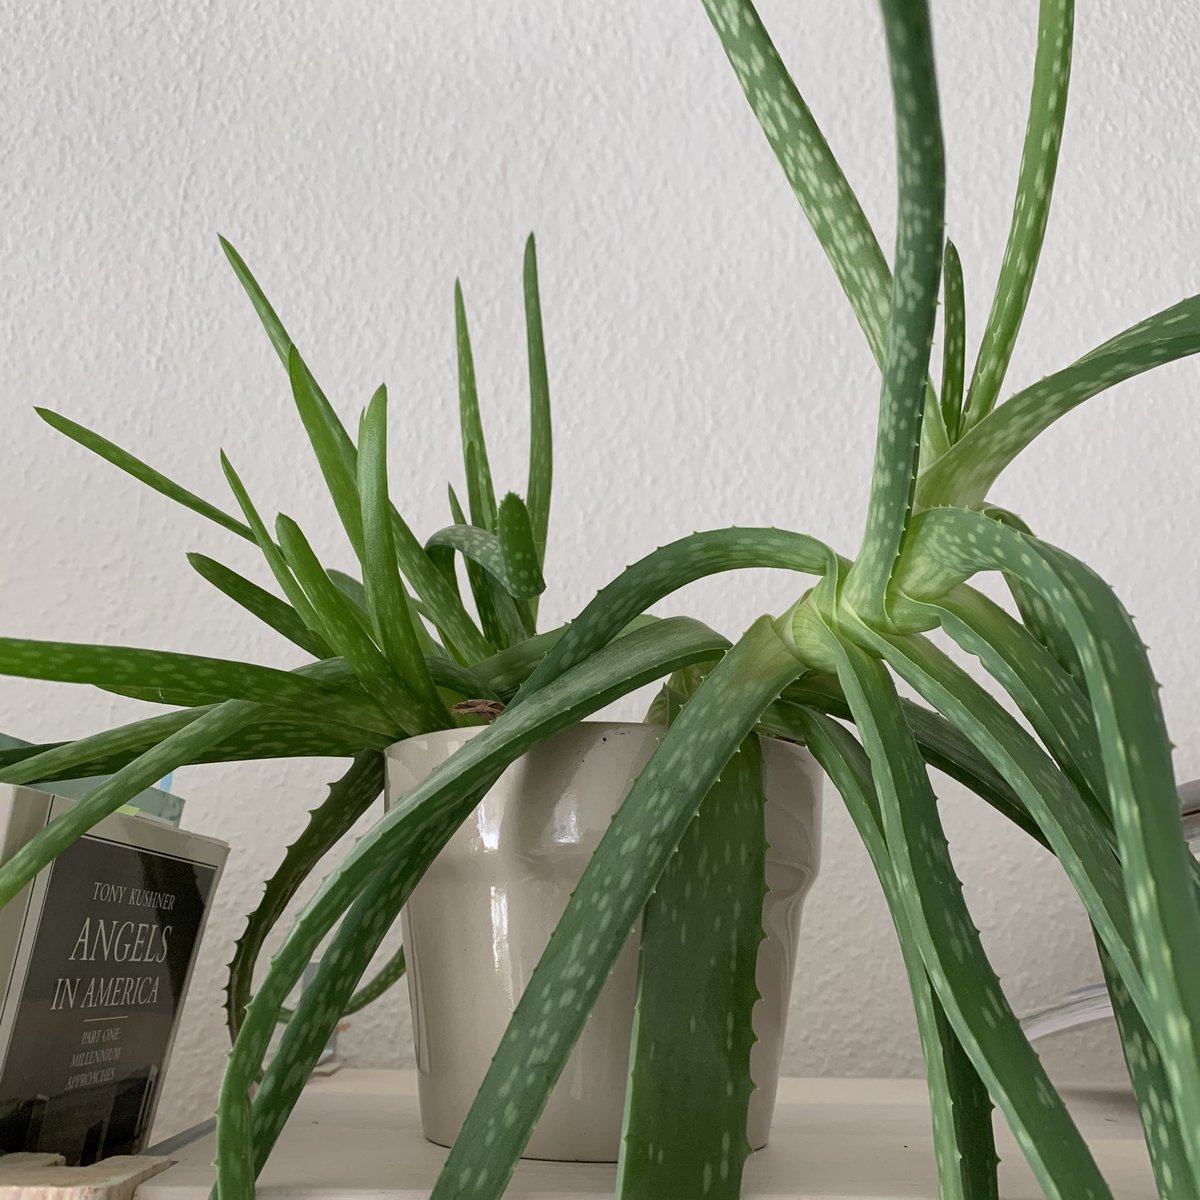 I got this aloe vera from a fandom friend as a housewarming gift... 5 years ago? I think of her every time I water it. I never told her how huge it got.